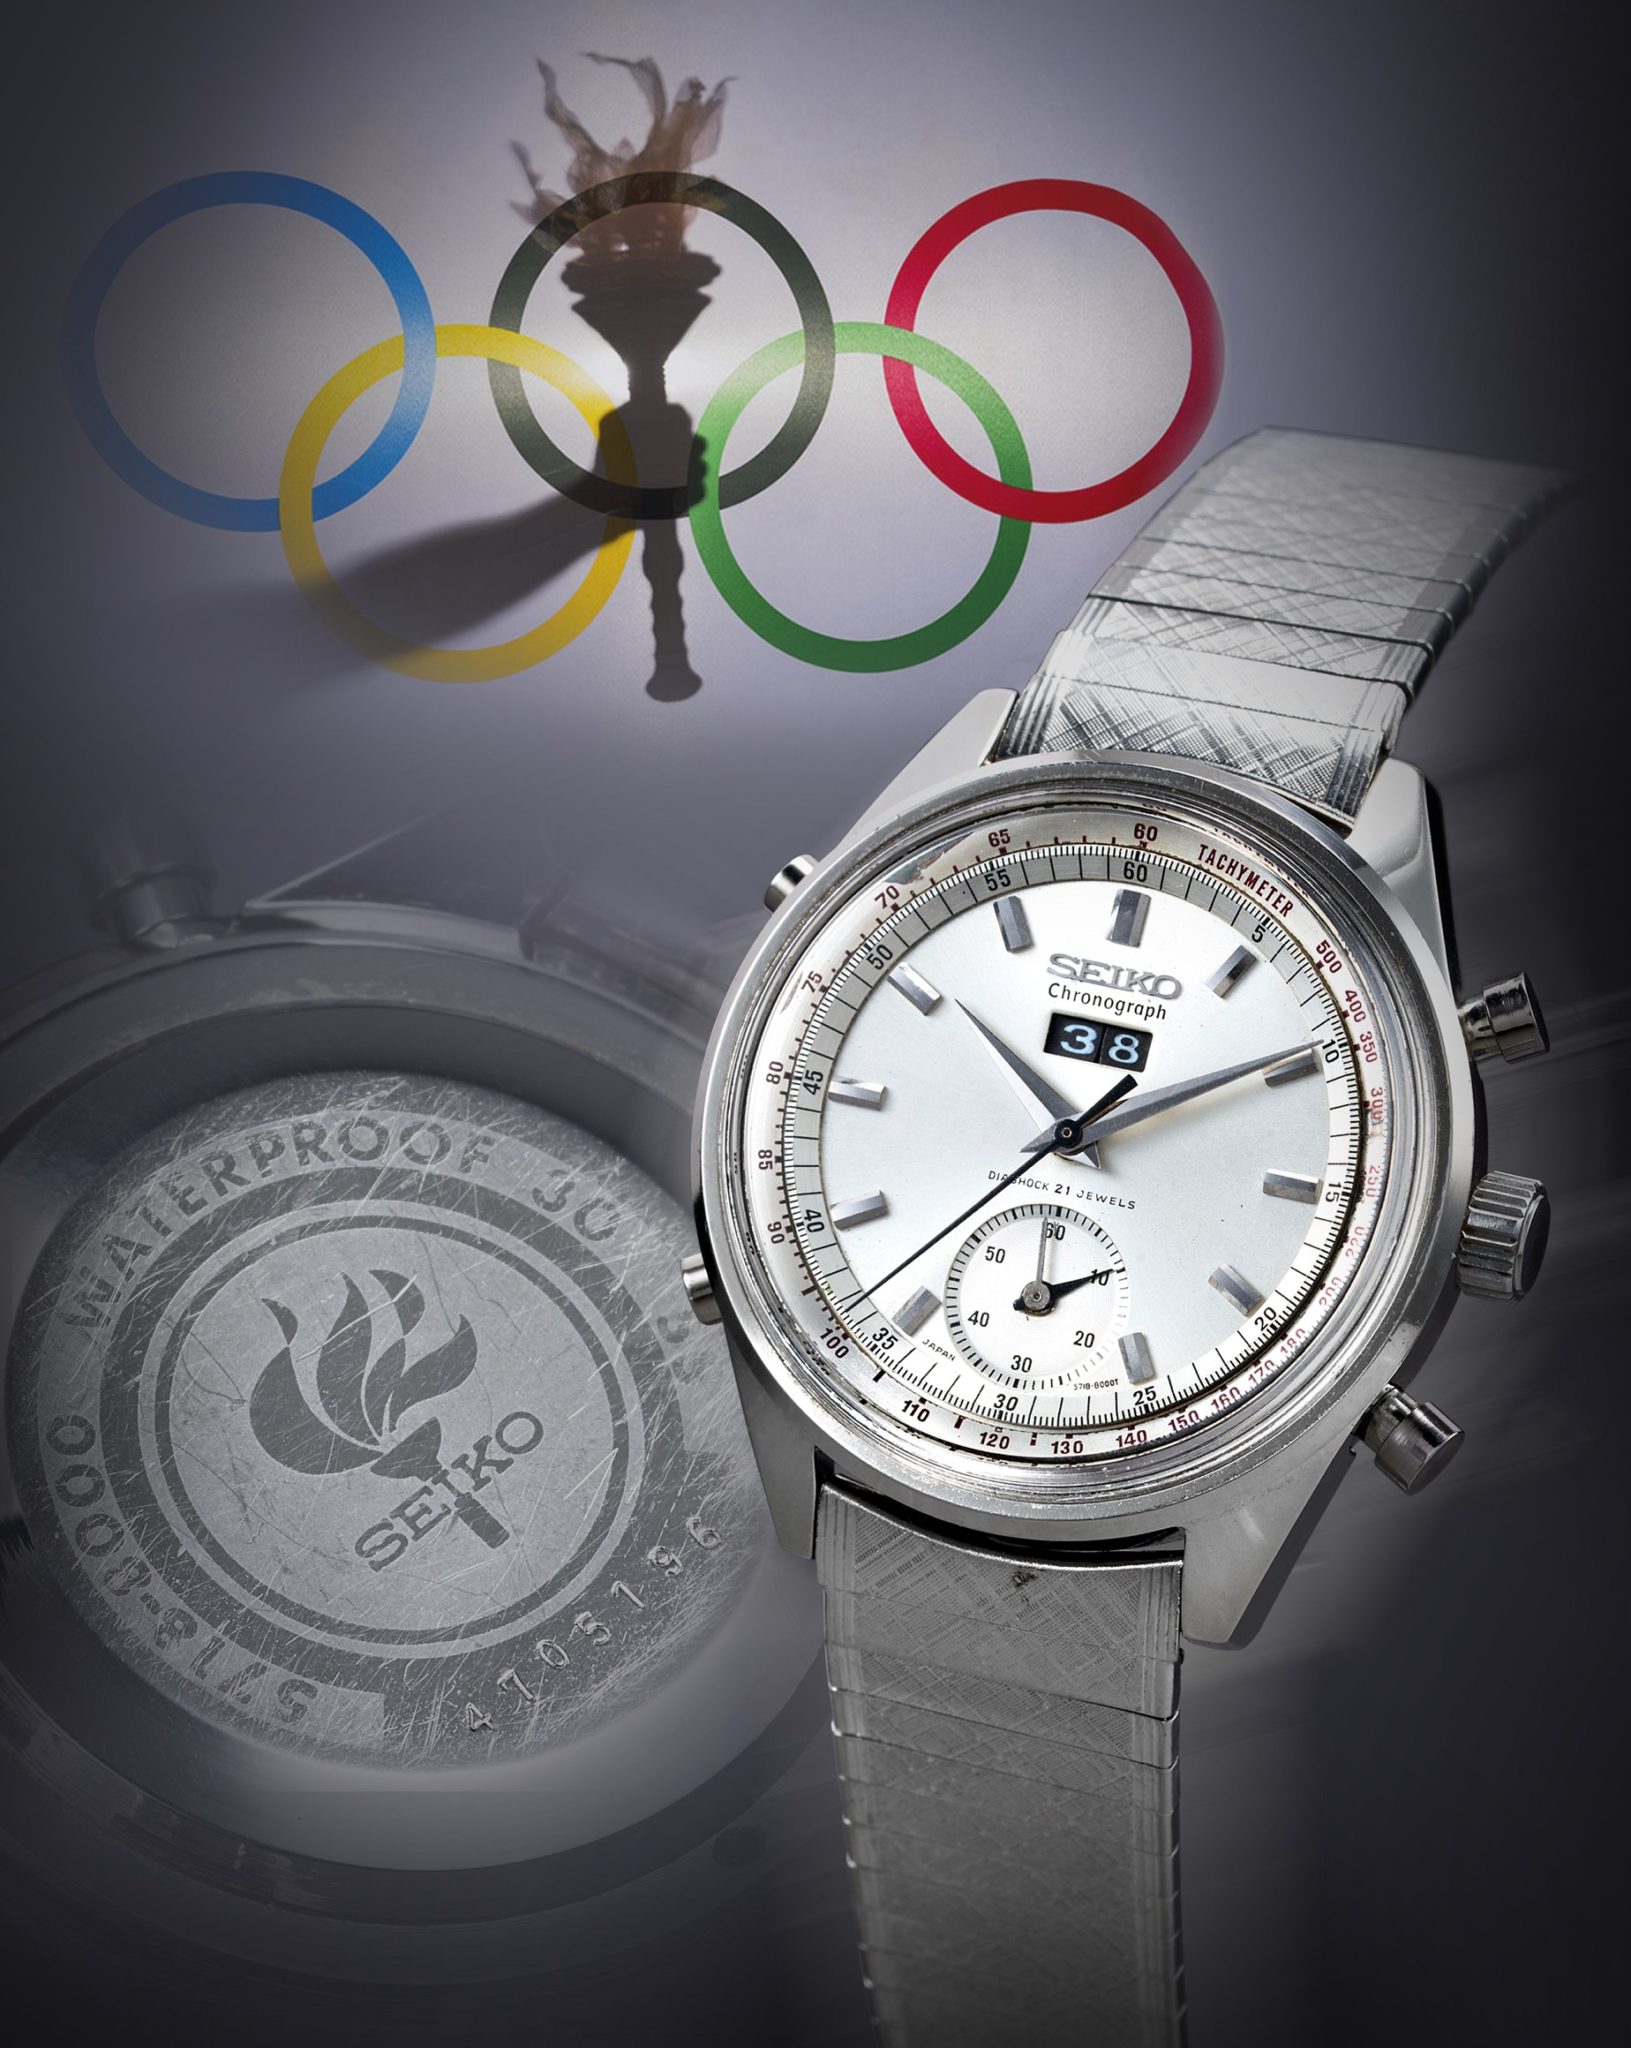 Bonhams hosts online auction for 200 collectible Seiko watches